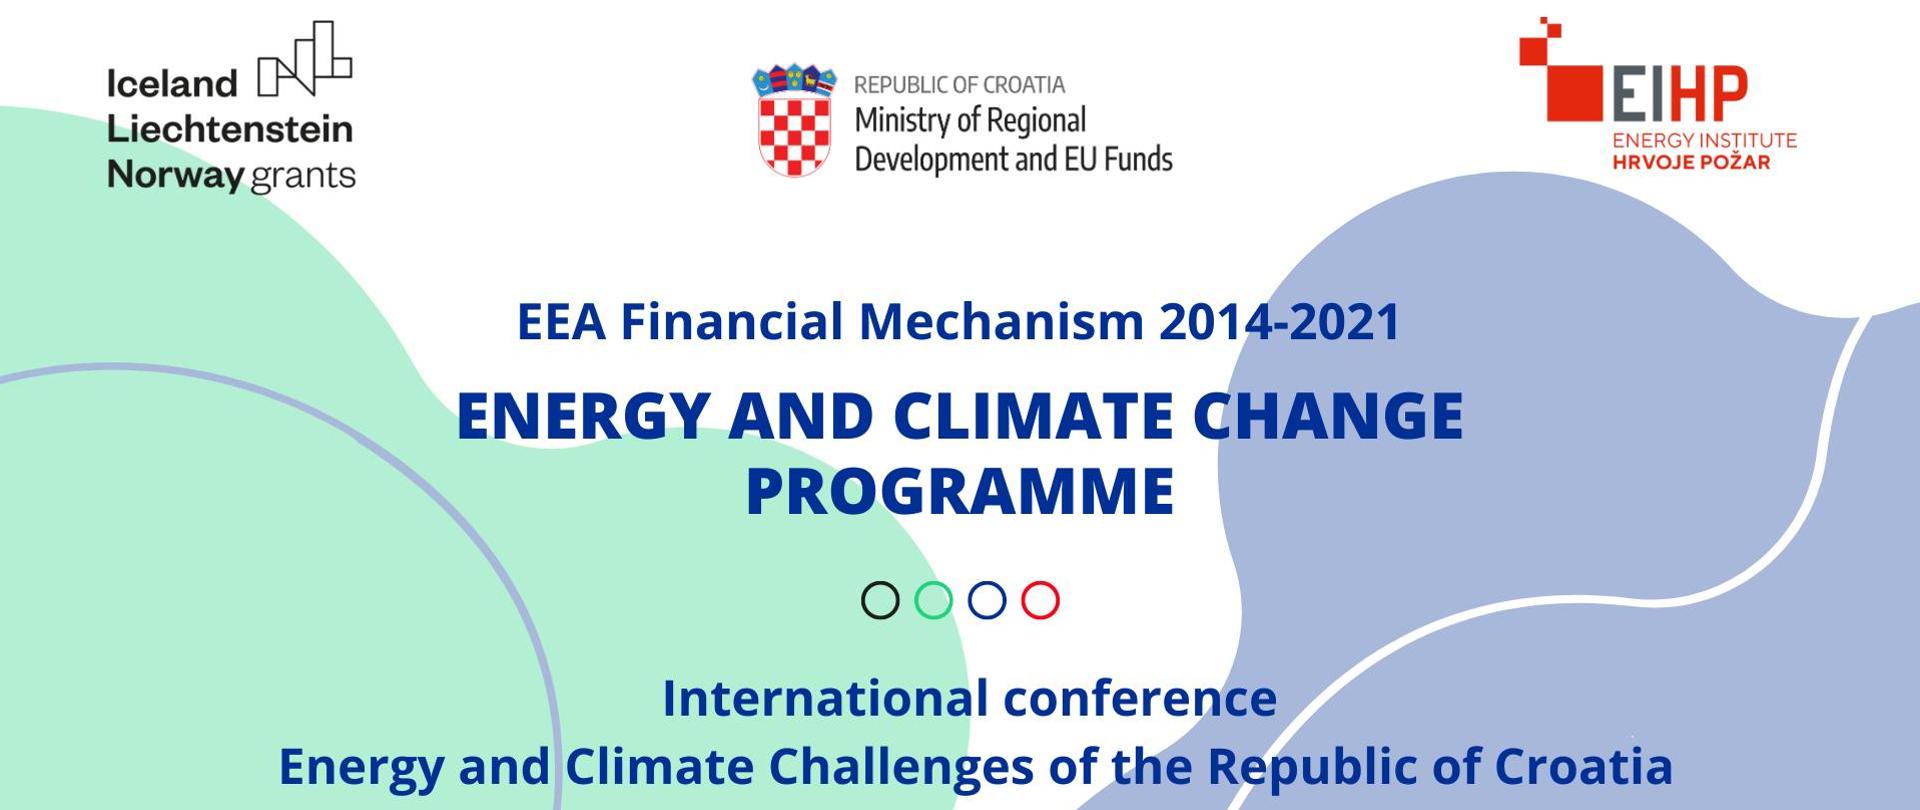 Energy and Climate Challenges of the Republic of Croatia - international conference in Dubrovnik